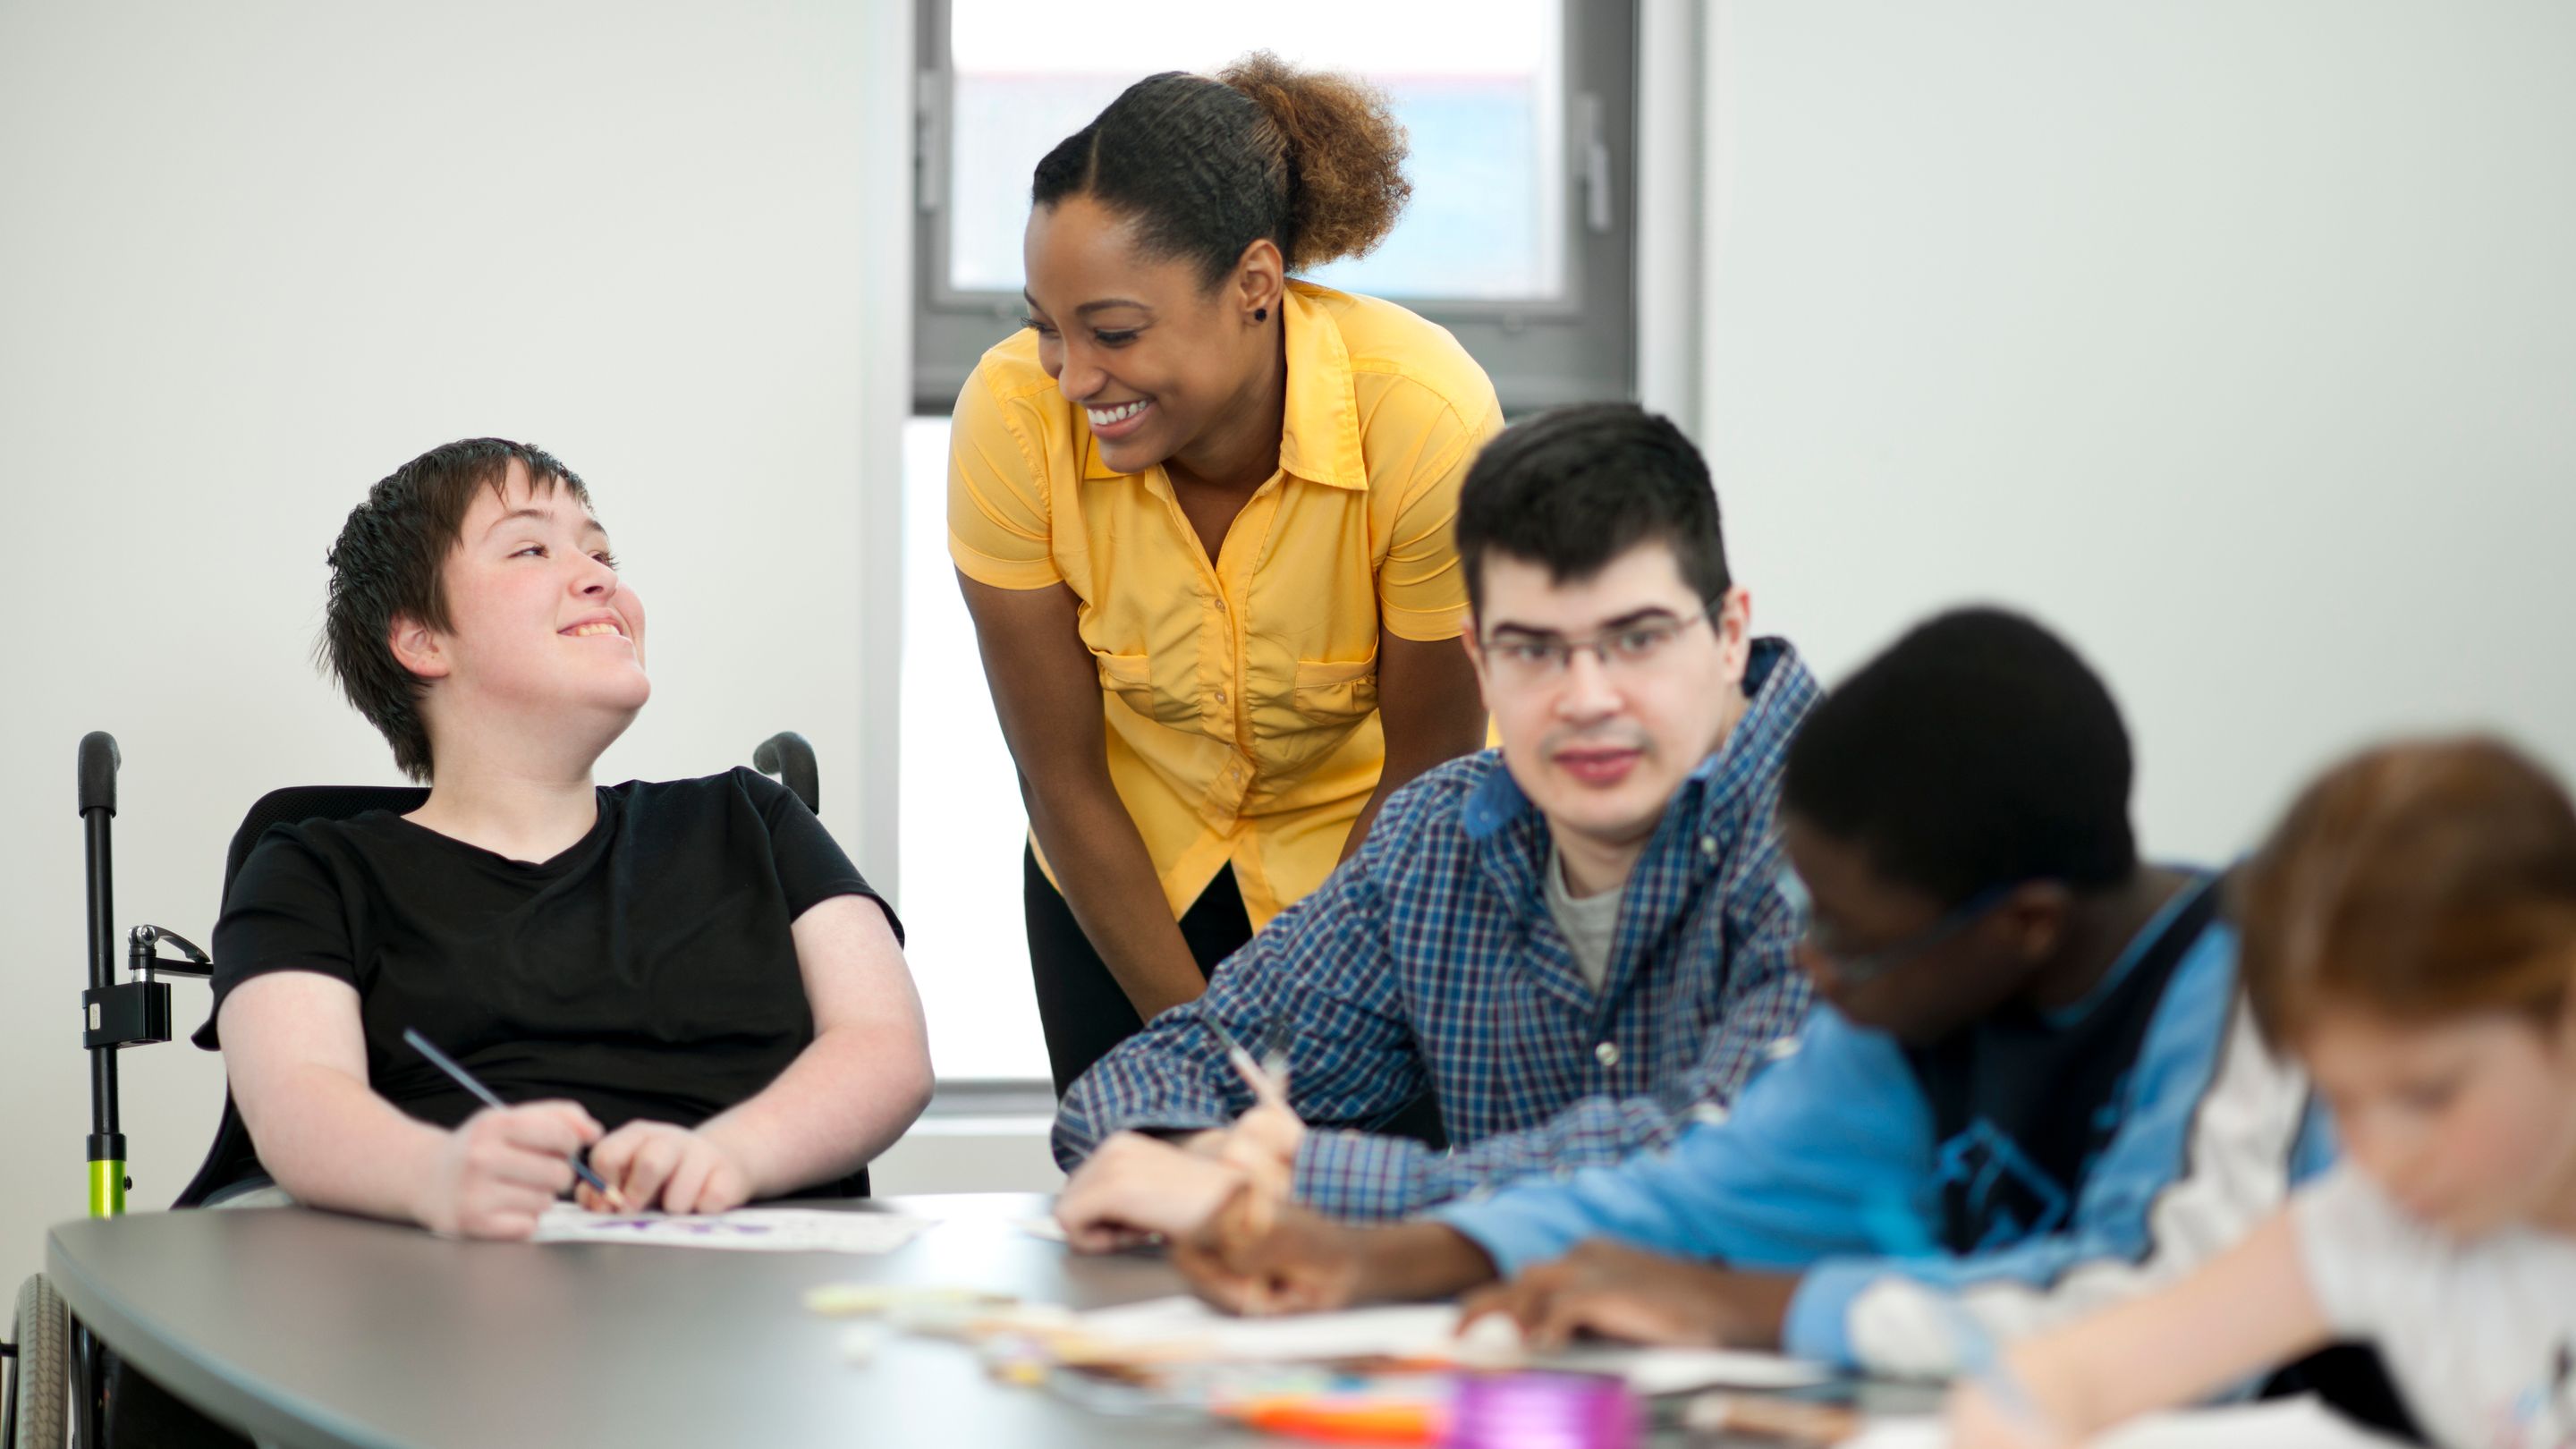 High Expectations for Students With Multiple Impairments | Edutopia